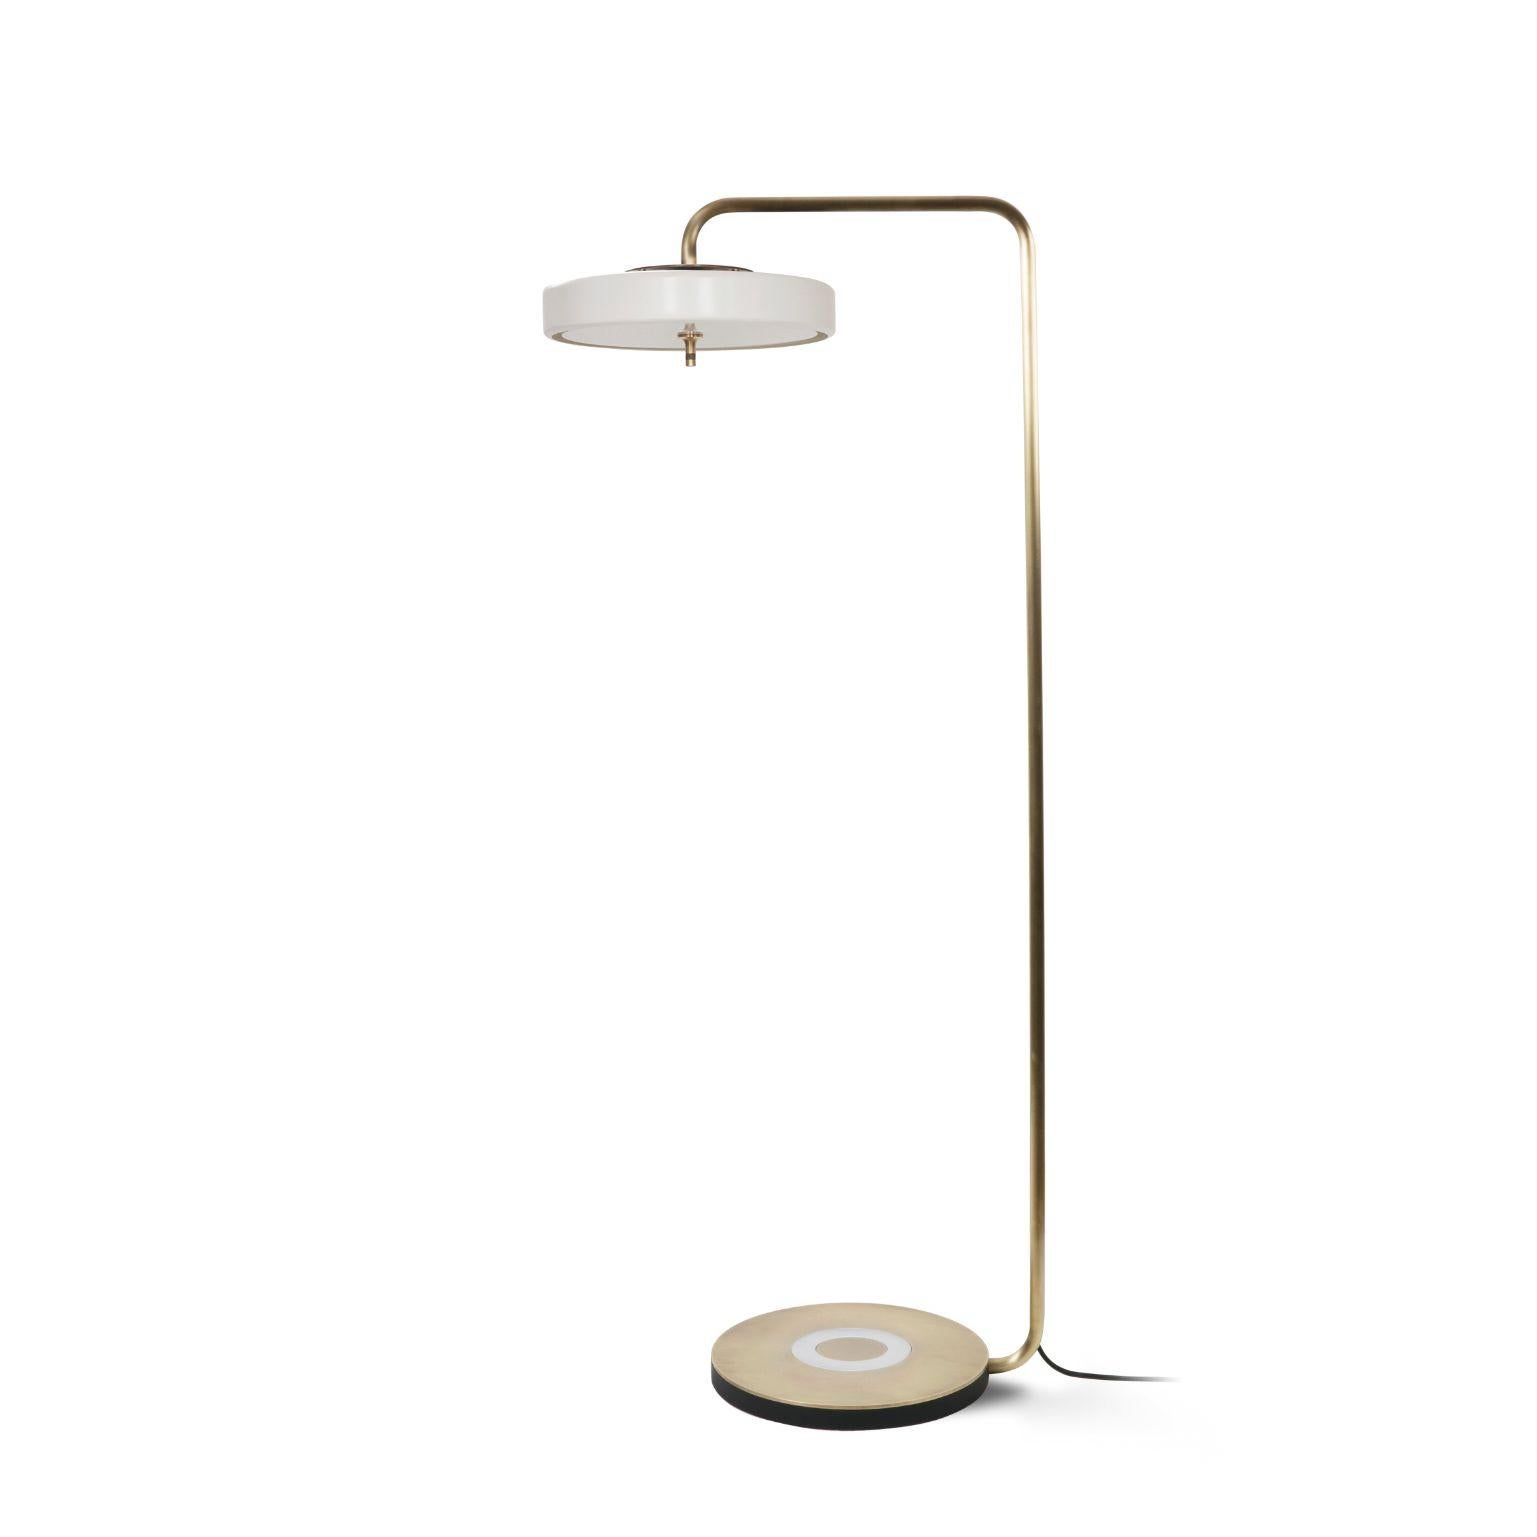 Revolve floor lamp - Polished brass - white by Bert Frank
Dimensions: 130 x 35.4 x 9.3 cm
Materials: Brass, steel

Also available in brushed brass
When Adam Yeats and Robbie Llewellyn founded Bert Frank in 2013 it was a meeting of minds and the